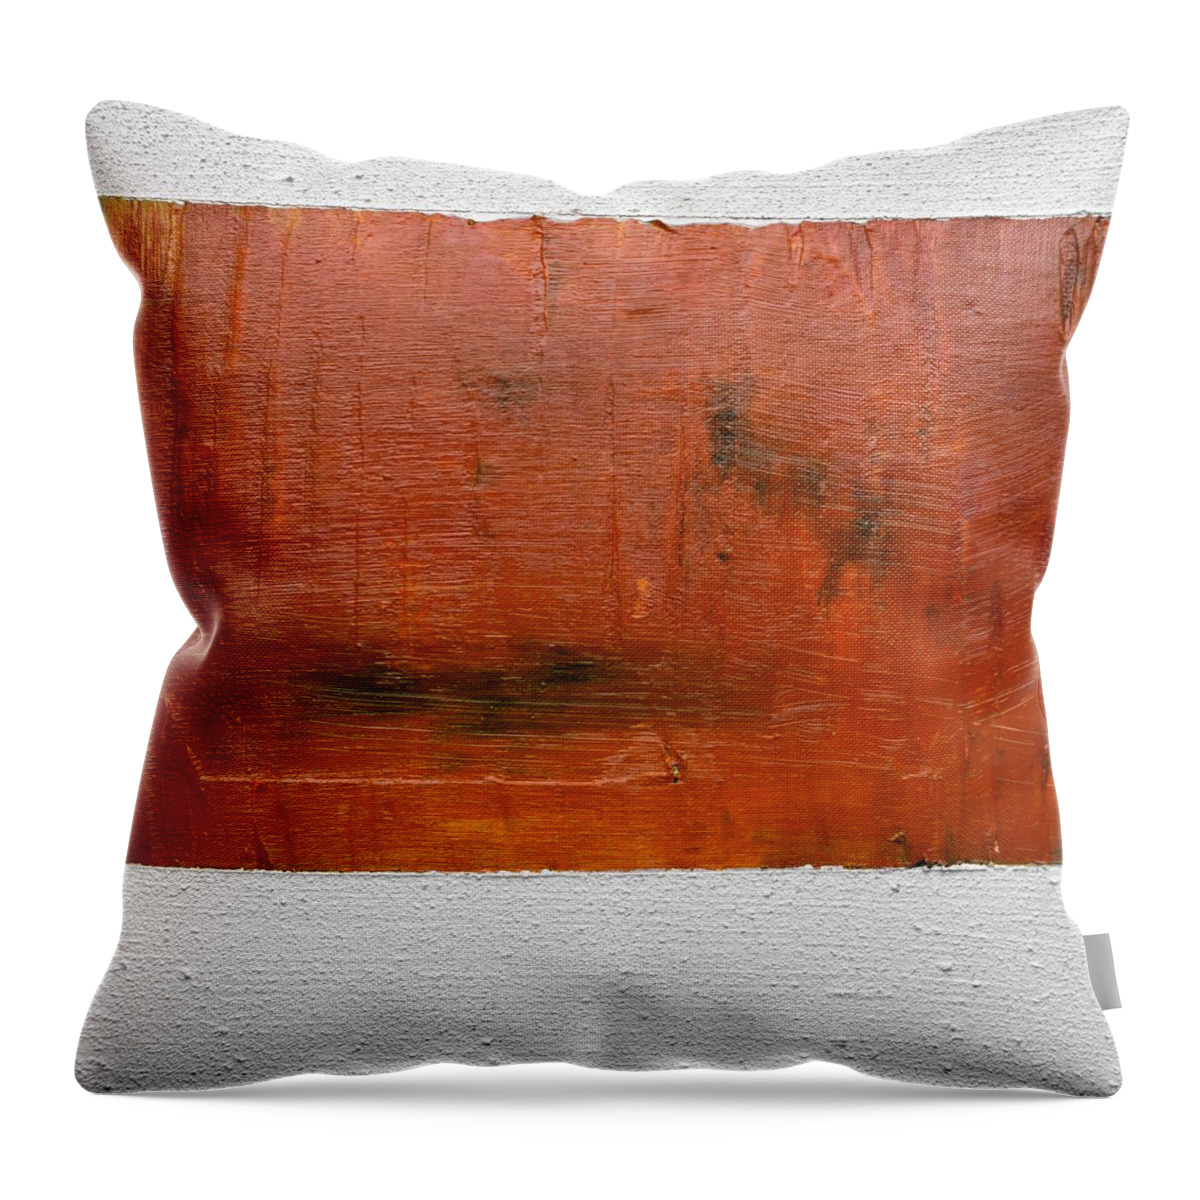 Lyrical Abstract Throw Pillow featuring the painting Daily Abstraction 218010701 by Eduard Meinema